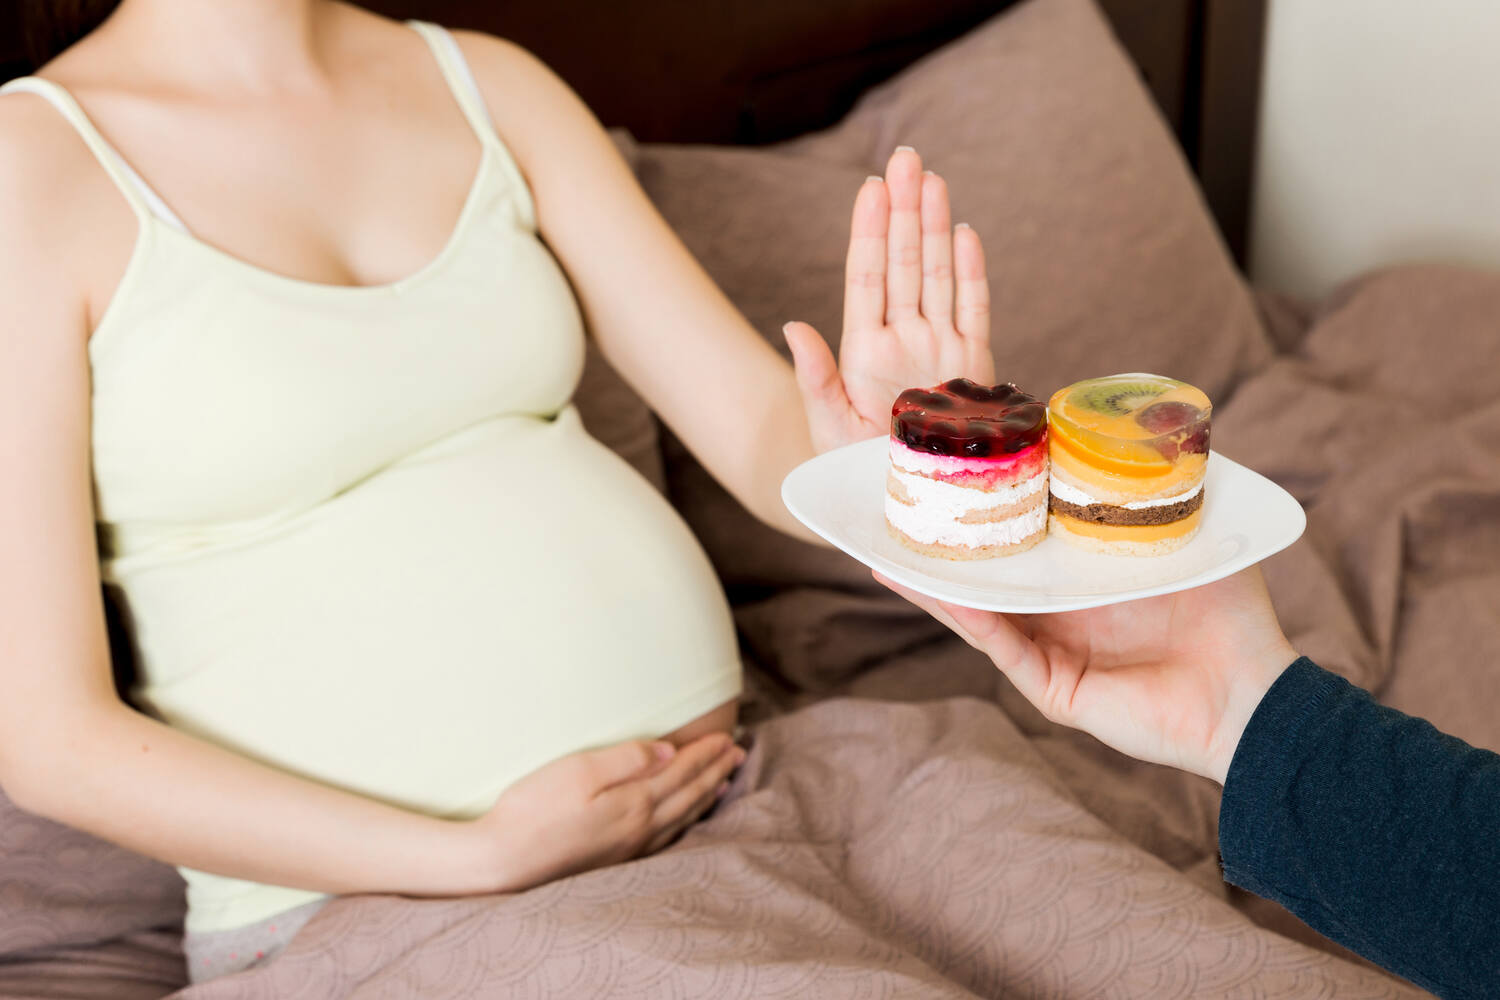 Risks Associated With Eating Cake During Pregnancy